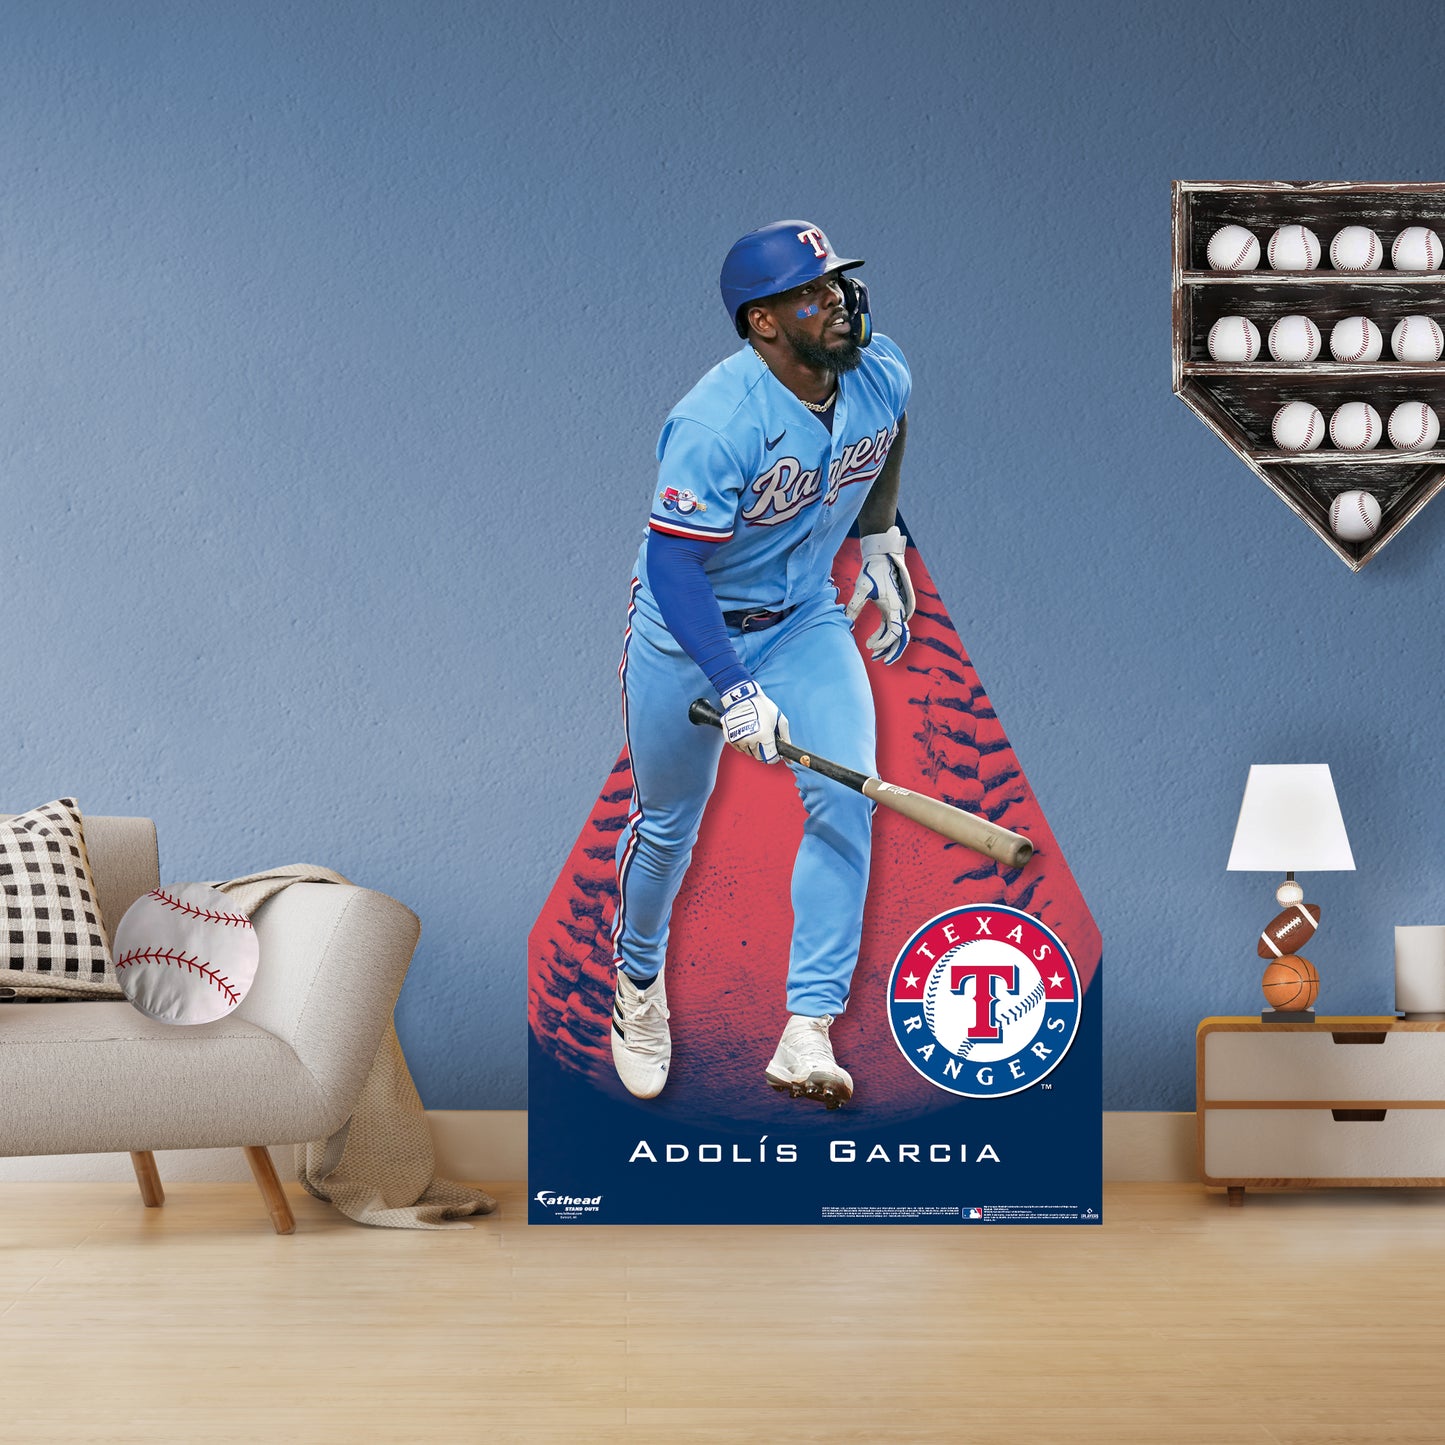 Texas Rangers: Adolís Garcia 2022  Life-Size   Foam Core Cutout  - Officially Licensed MLB    Stand Out